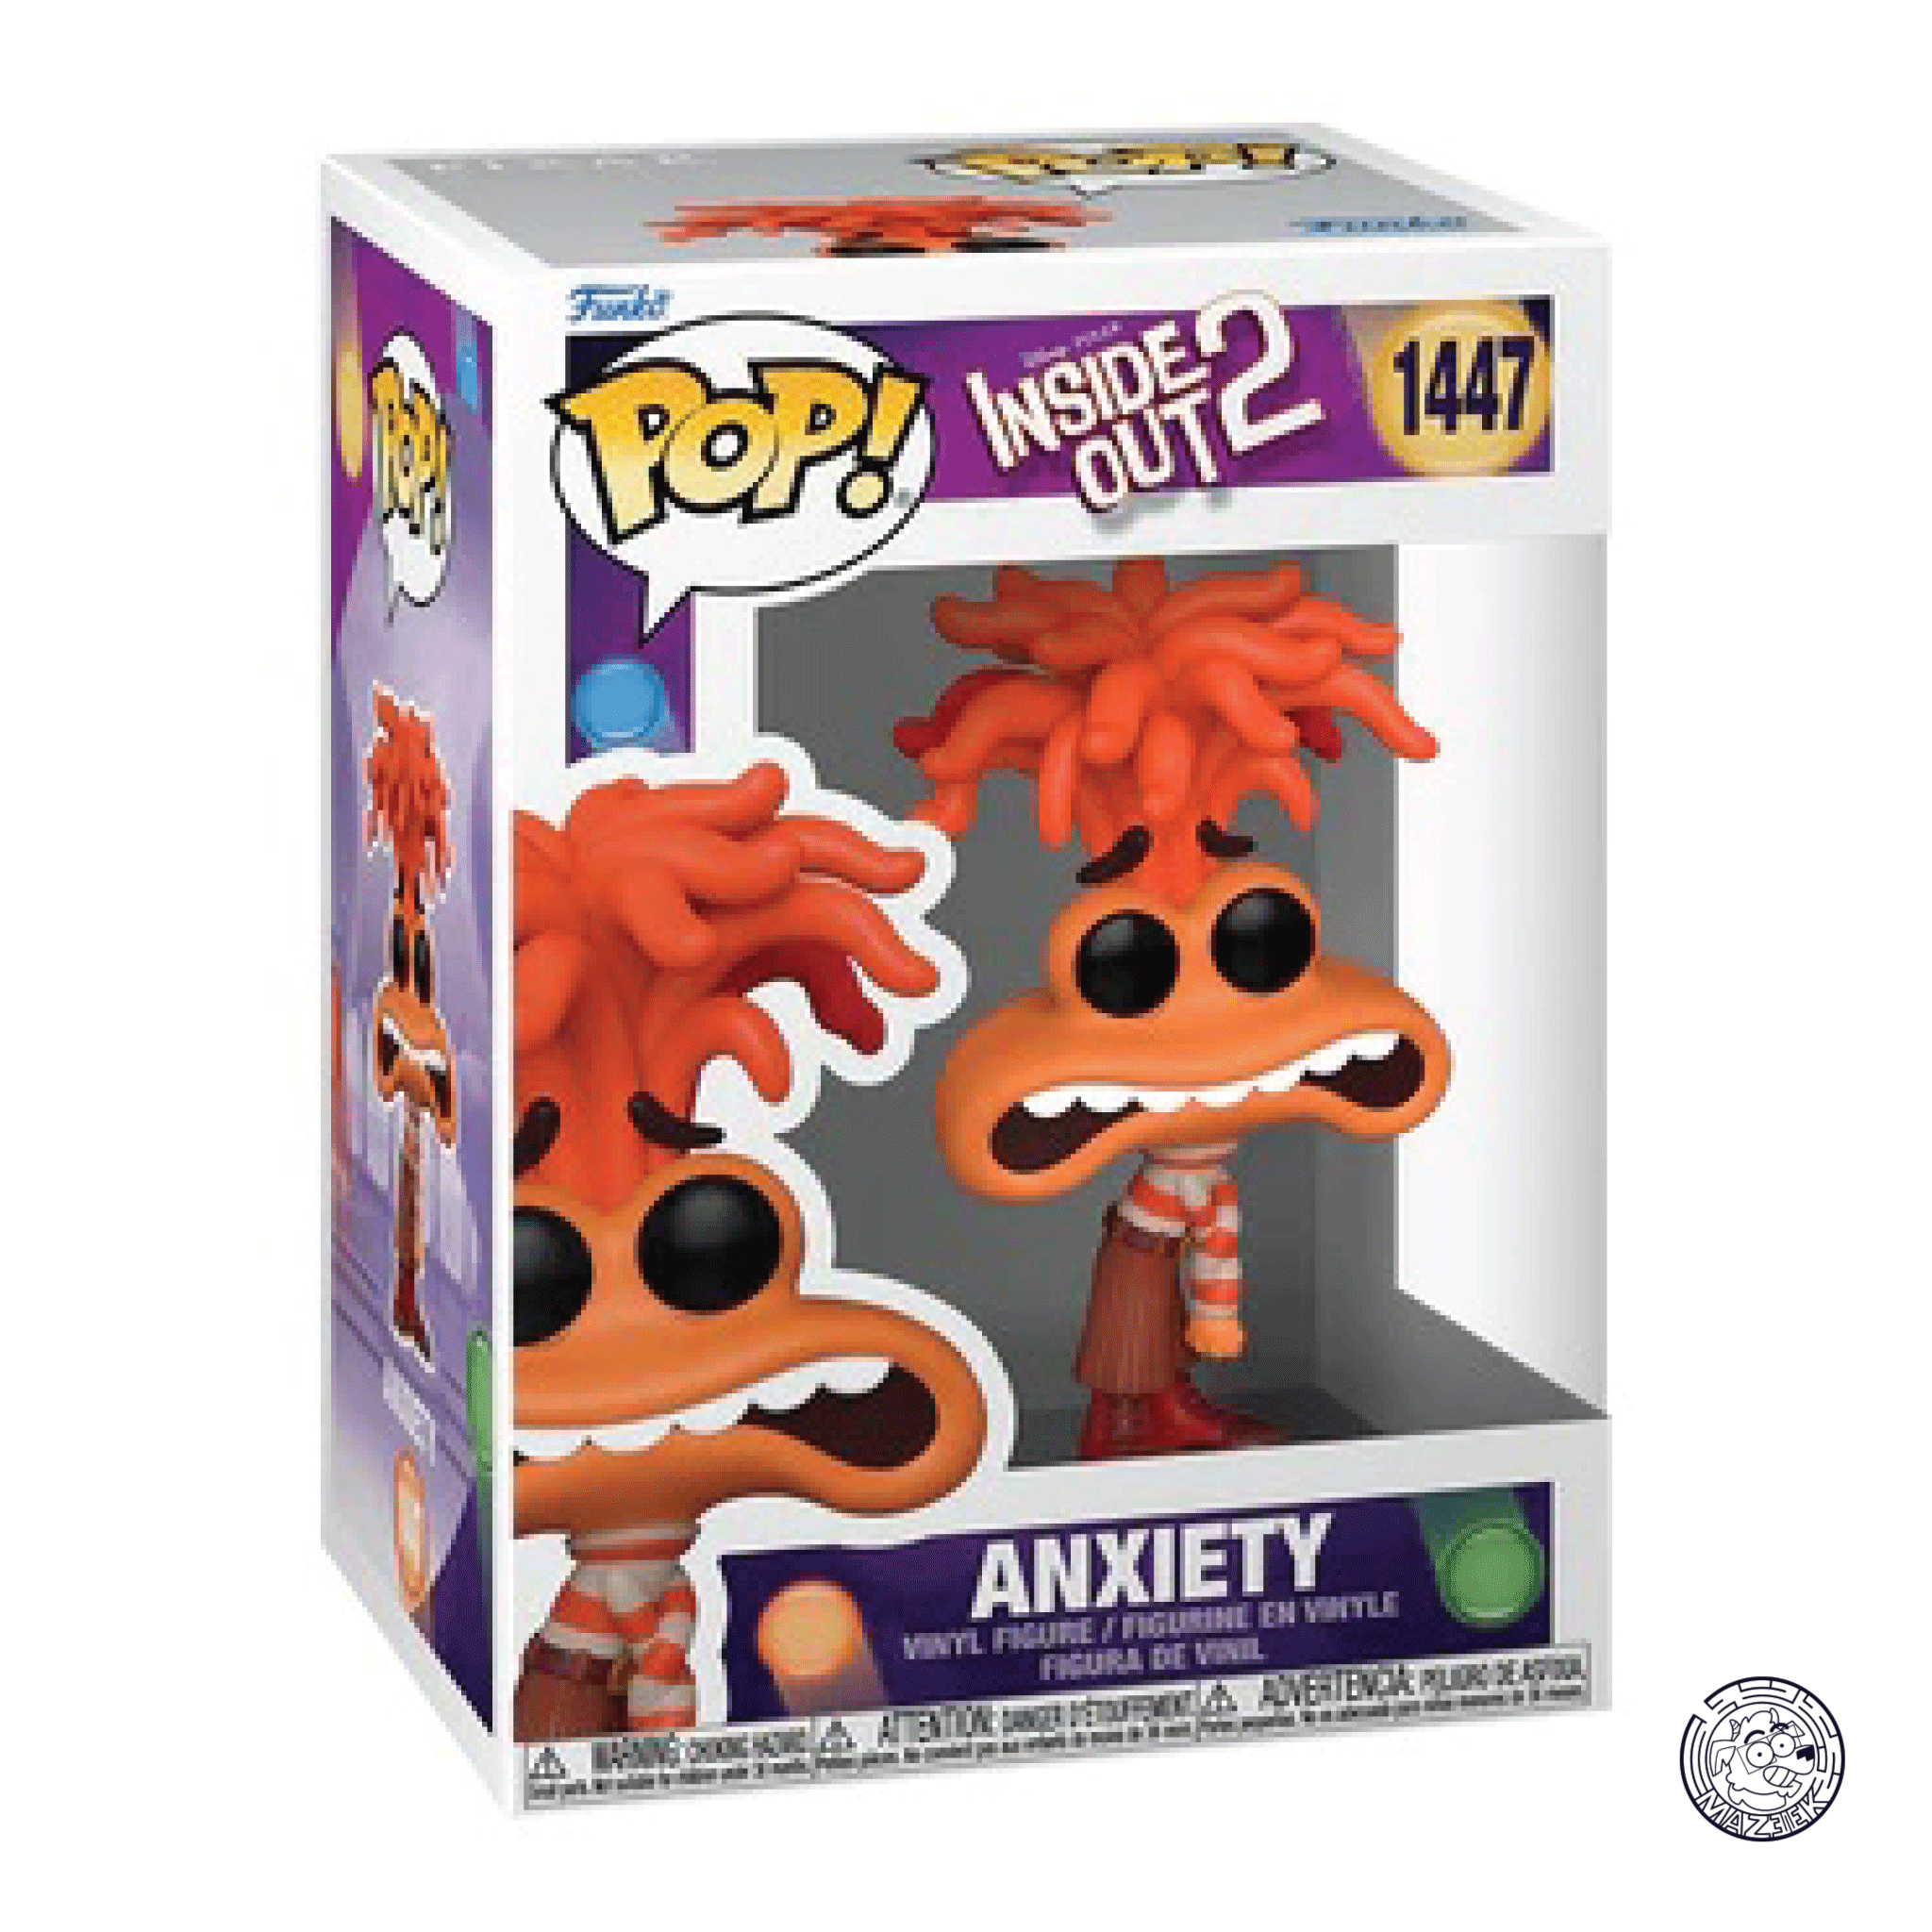 Funko POP! Inside Out 2: Anxiety 1447